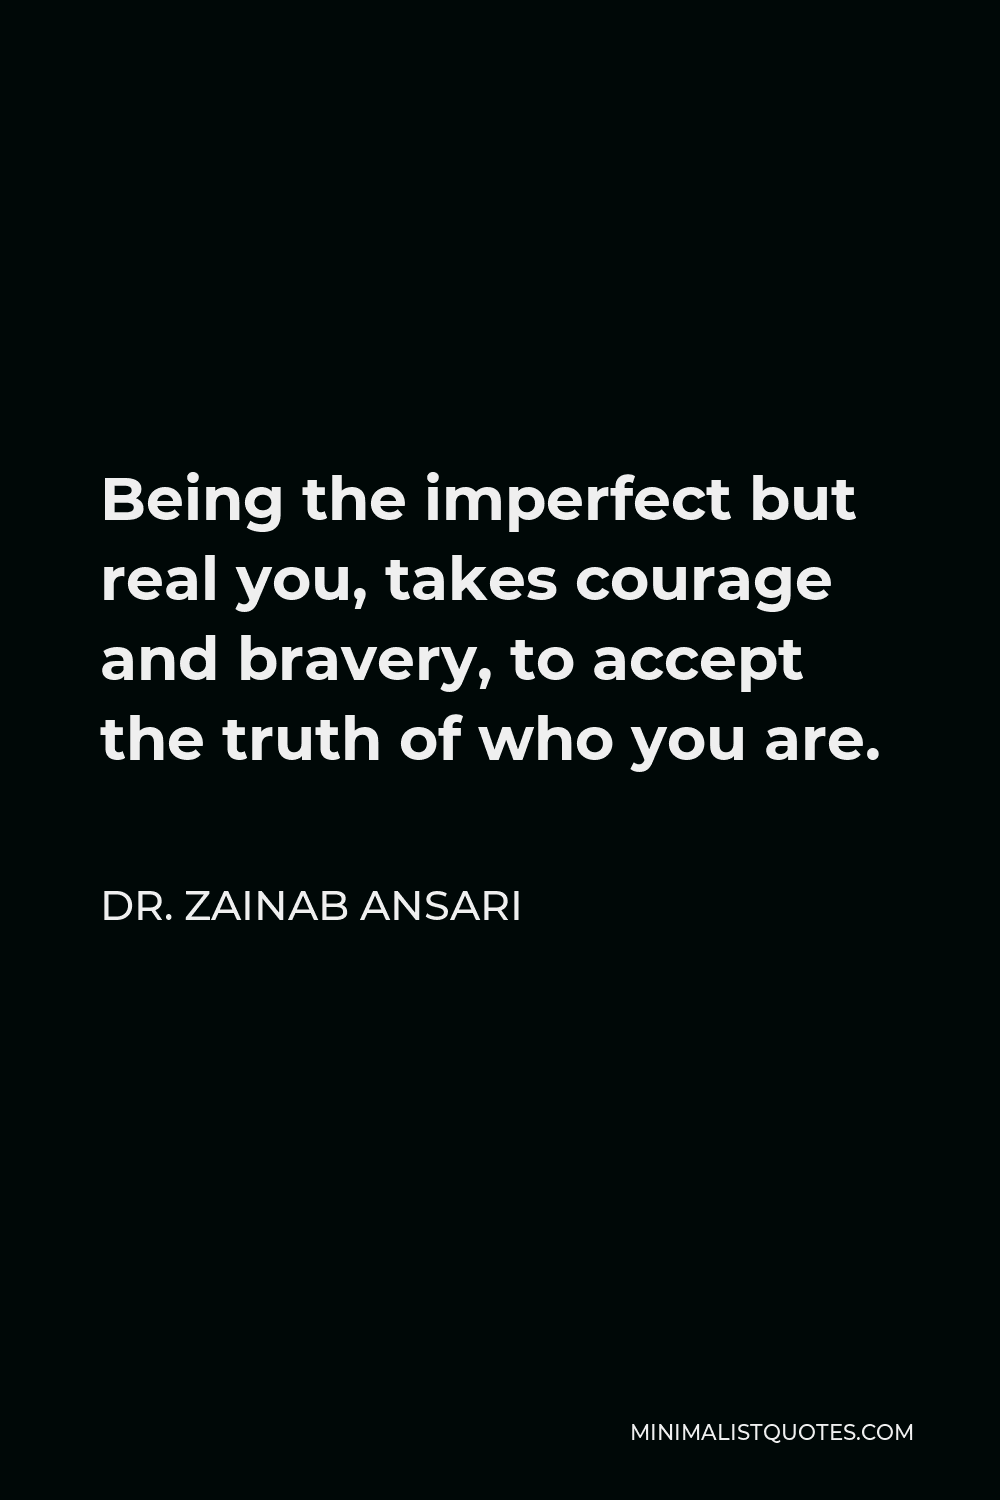 Dr. Zainab Ansari Quote - Being the imperfect but real you, takes courage and bravery, to accept the truth of who you are.